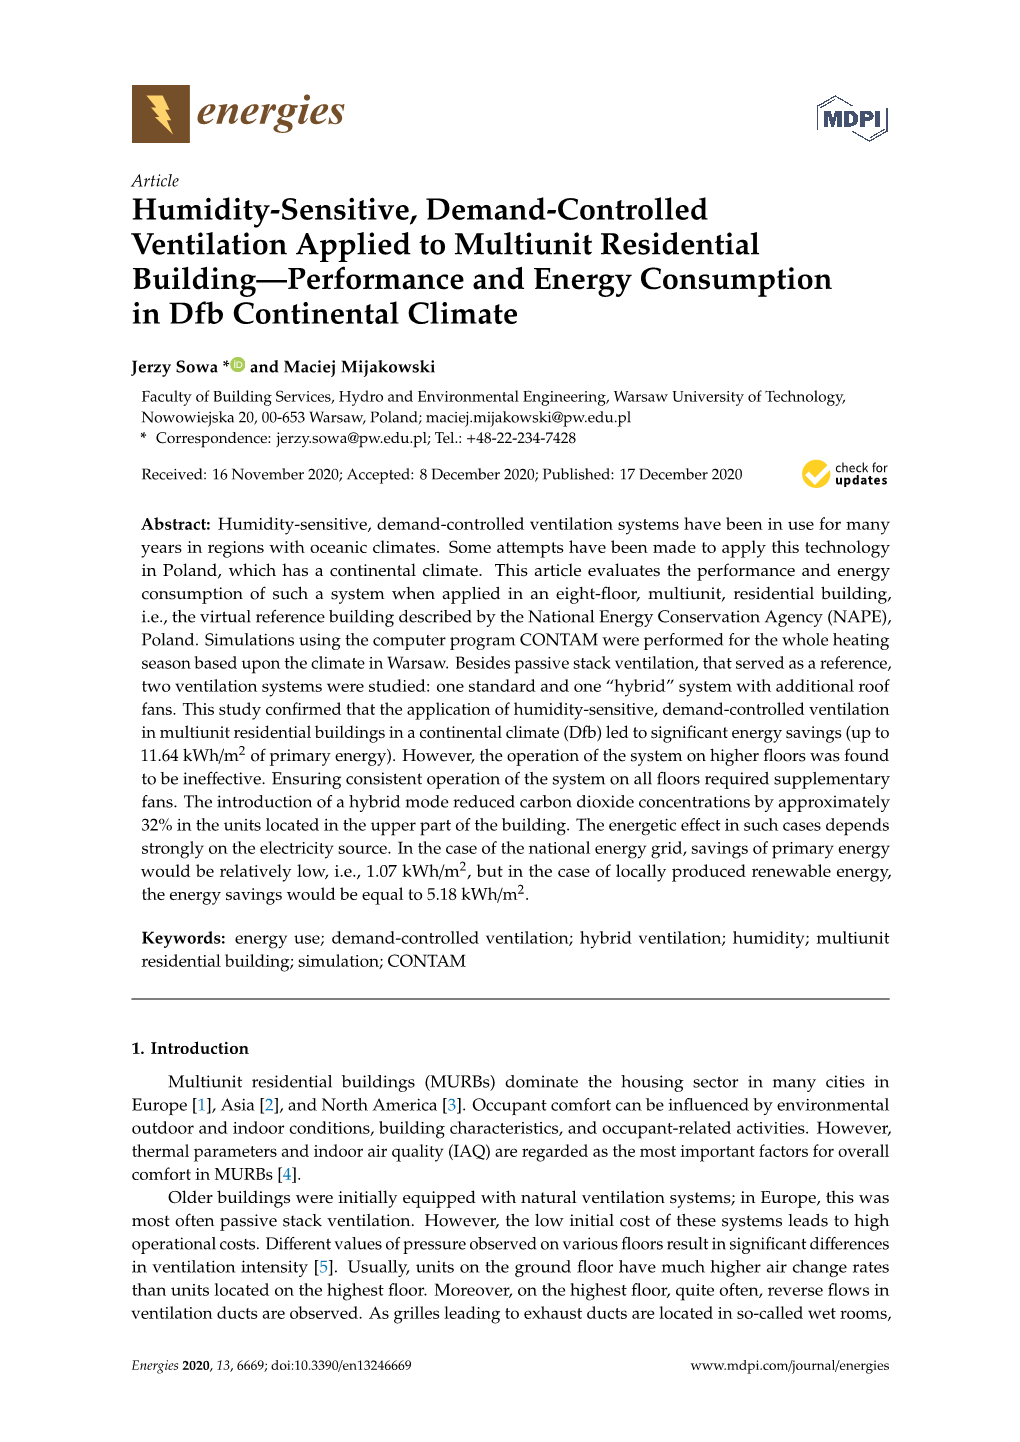 Humidity-Sensitive, Demand-Controlled Ventilation Applied to Multiunit Residential Building—Performance and Energy Consumption in Dfb Continental Climate